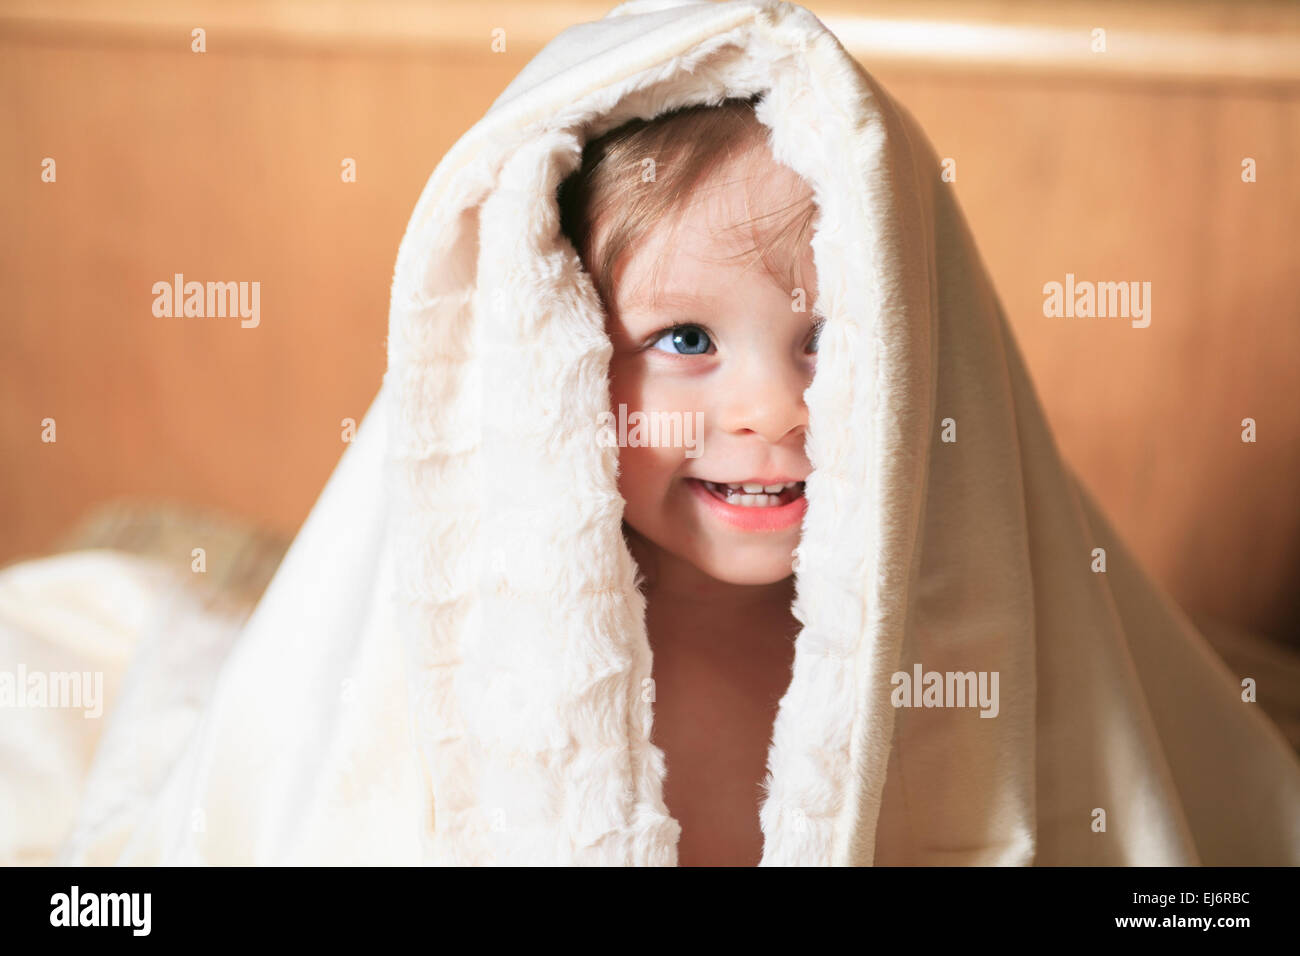 A baby with towel in his head, Stock Photo